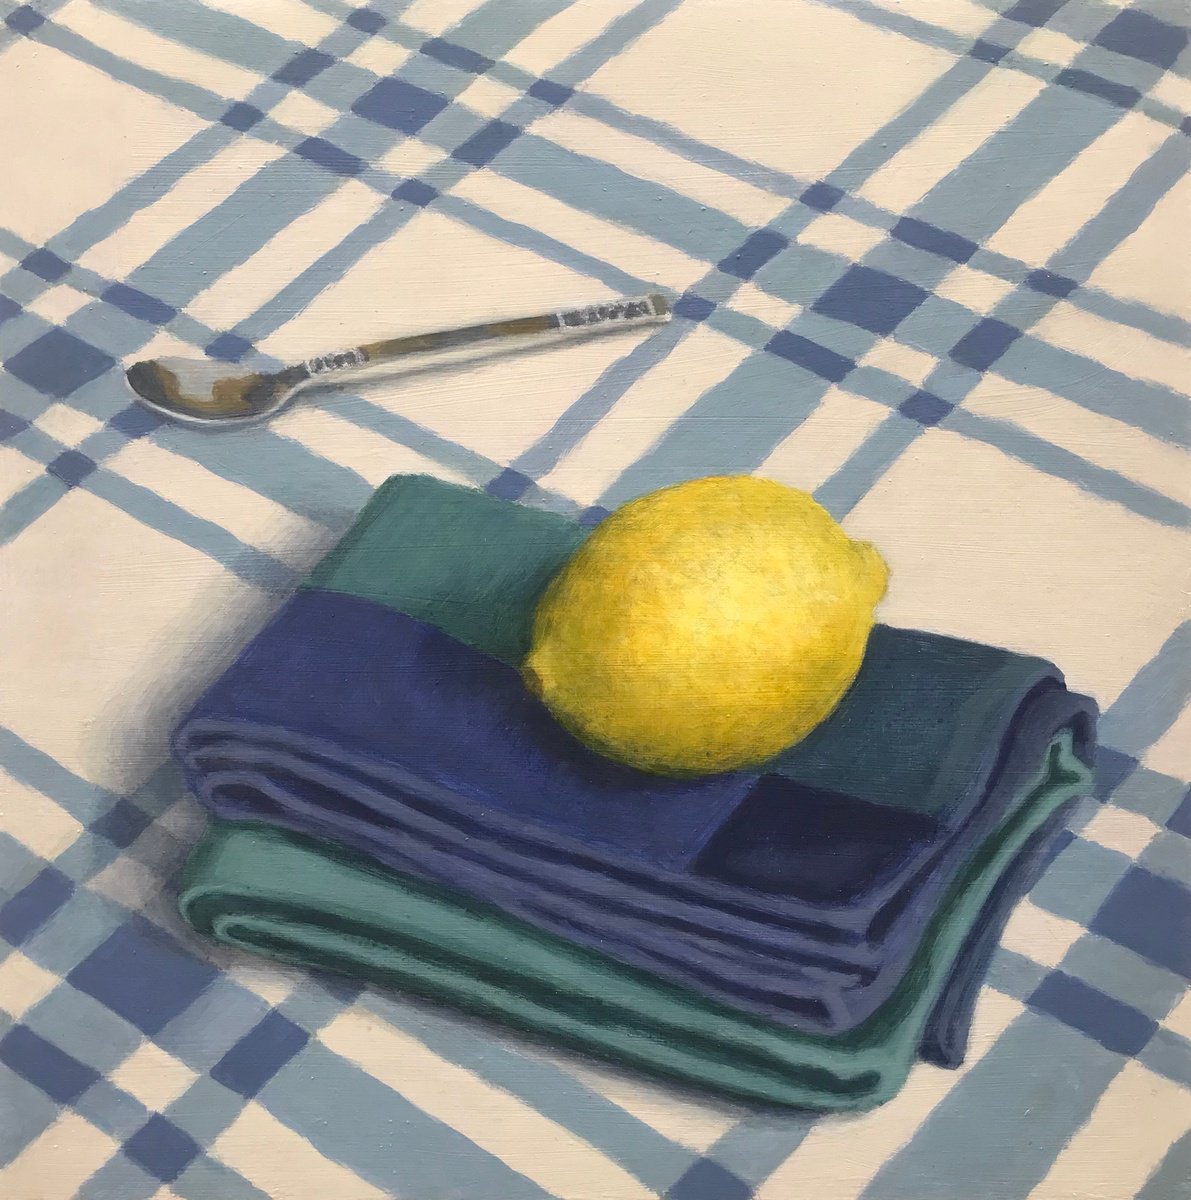 Still life with Lemon and Teaspoon by Hugo Lines